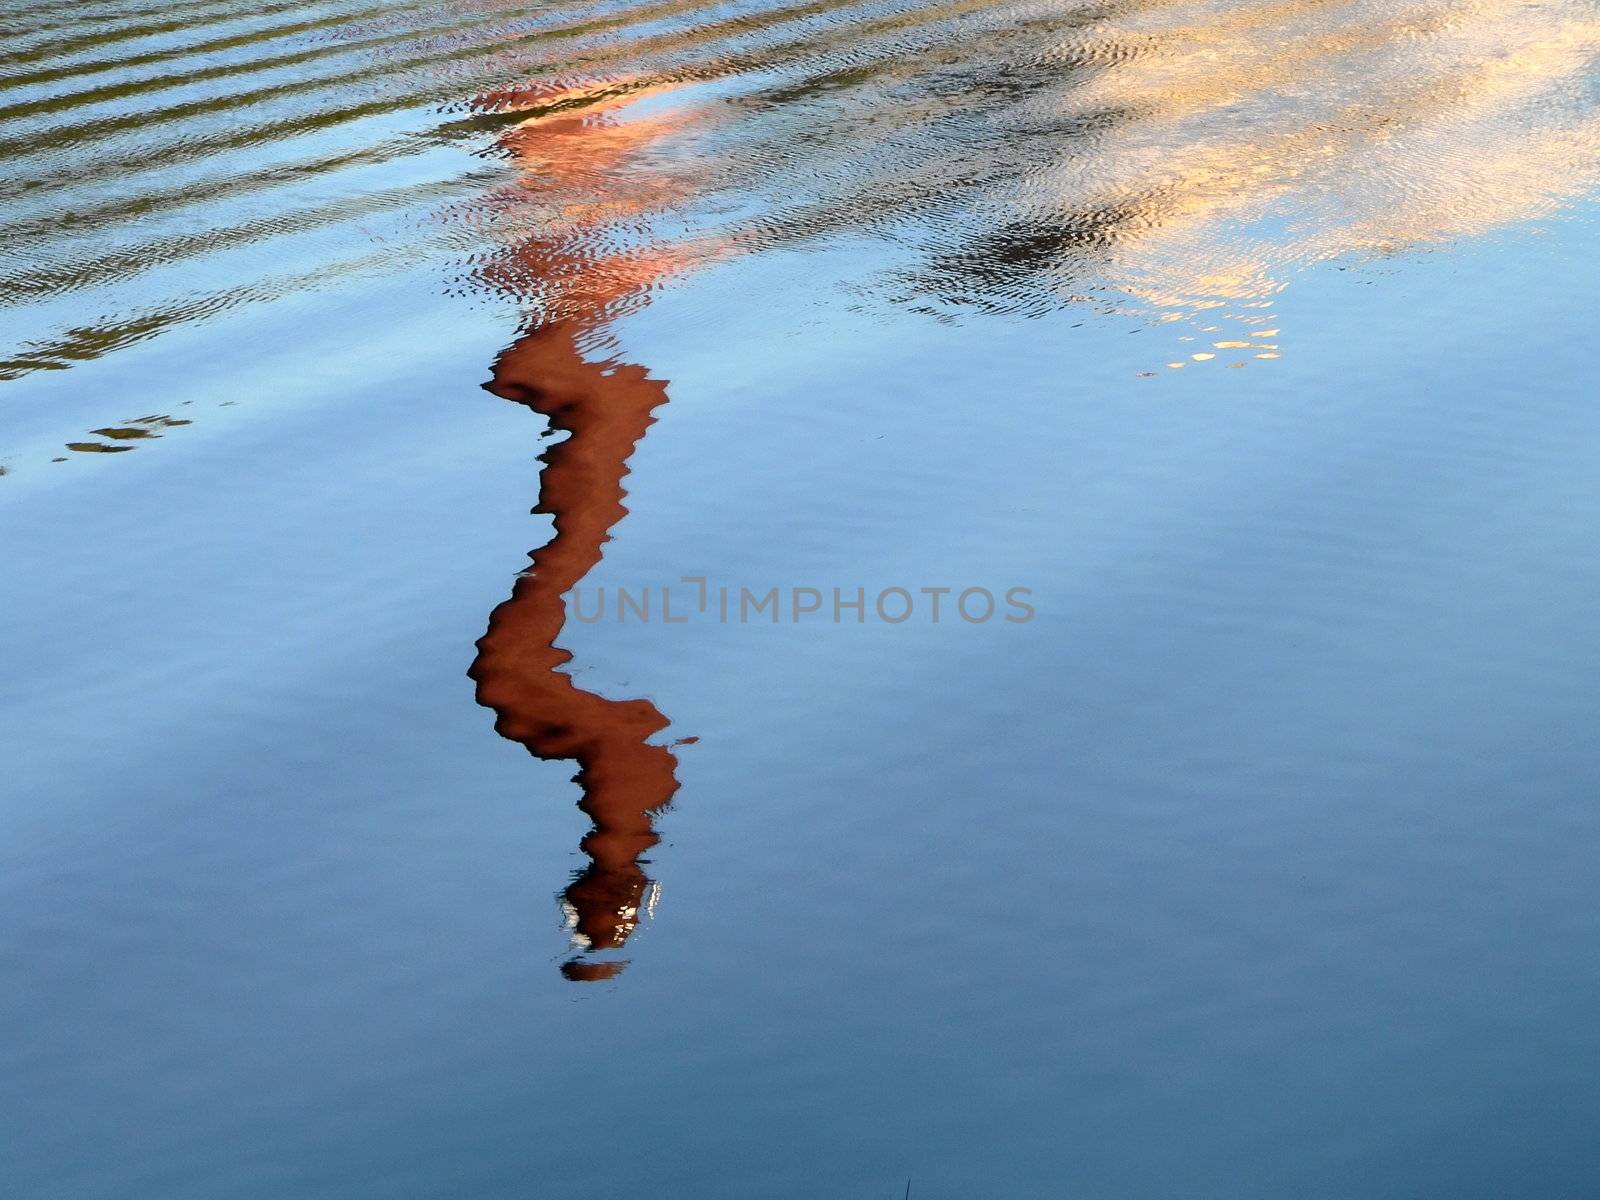 Strange reflection on surface of the water